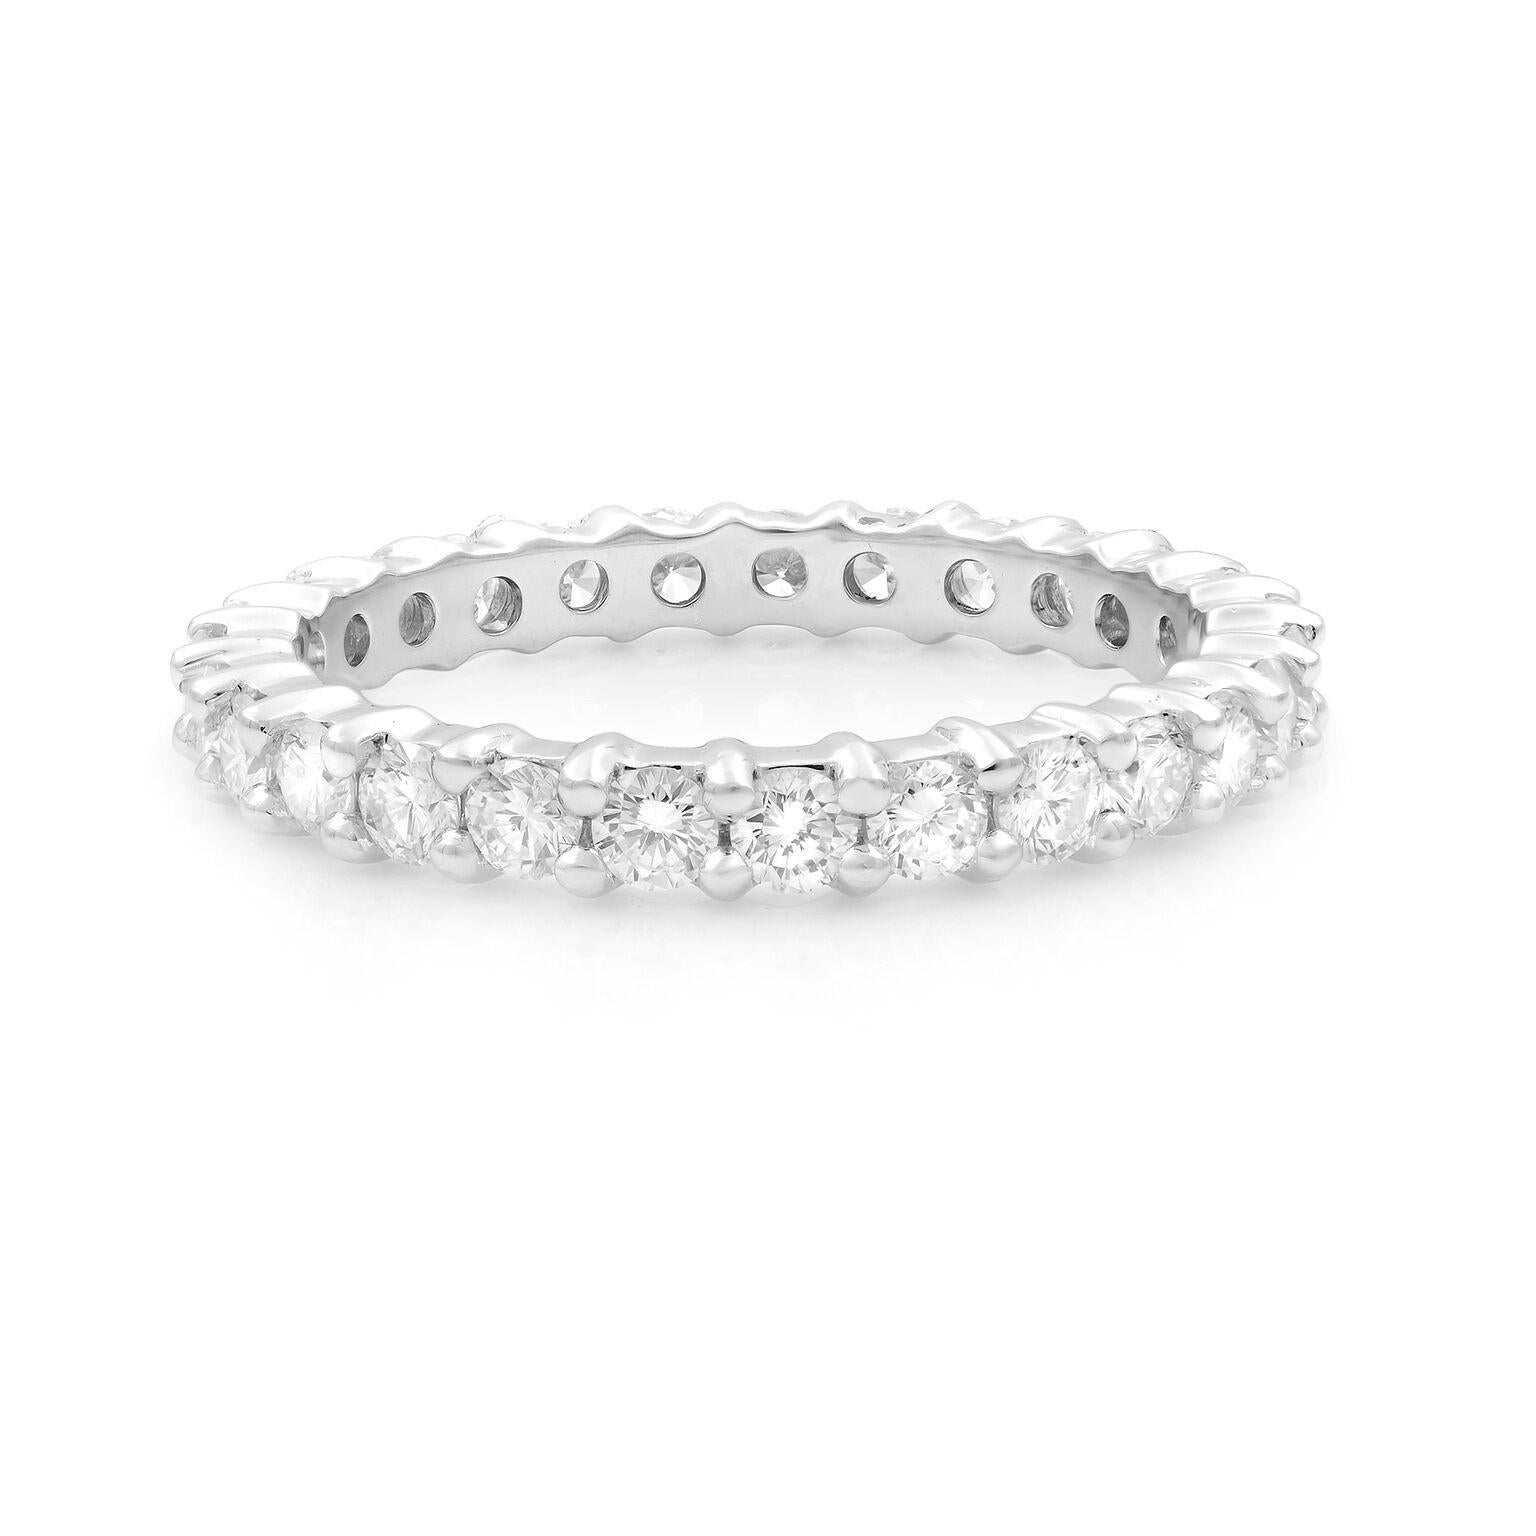 This is a stunning 18k white gold eternity band from Italian designer Salvini. It has a total of 1.32 carat of prong set round cut diamonds wrapped all the way around the band. The width of the ring is 2.80 mm. This ring would look stunning worn